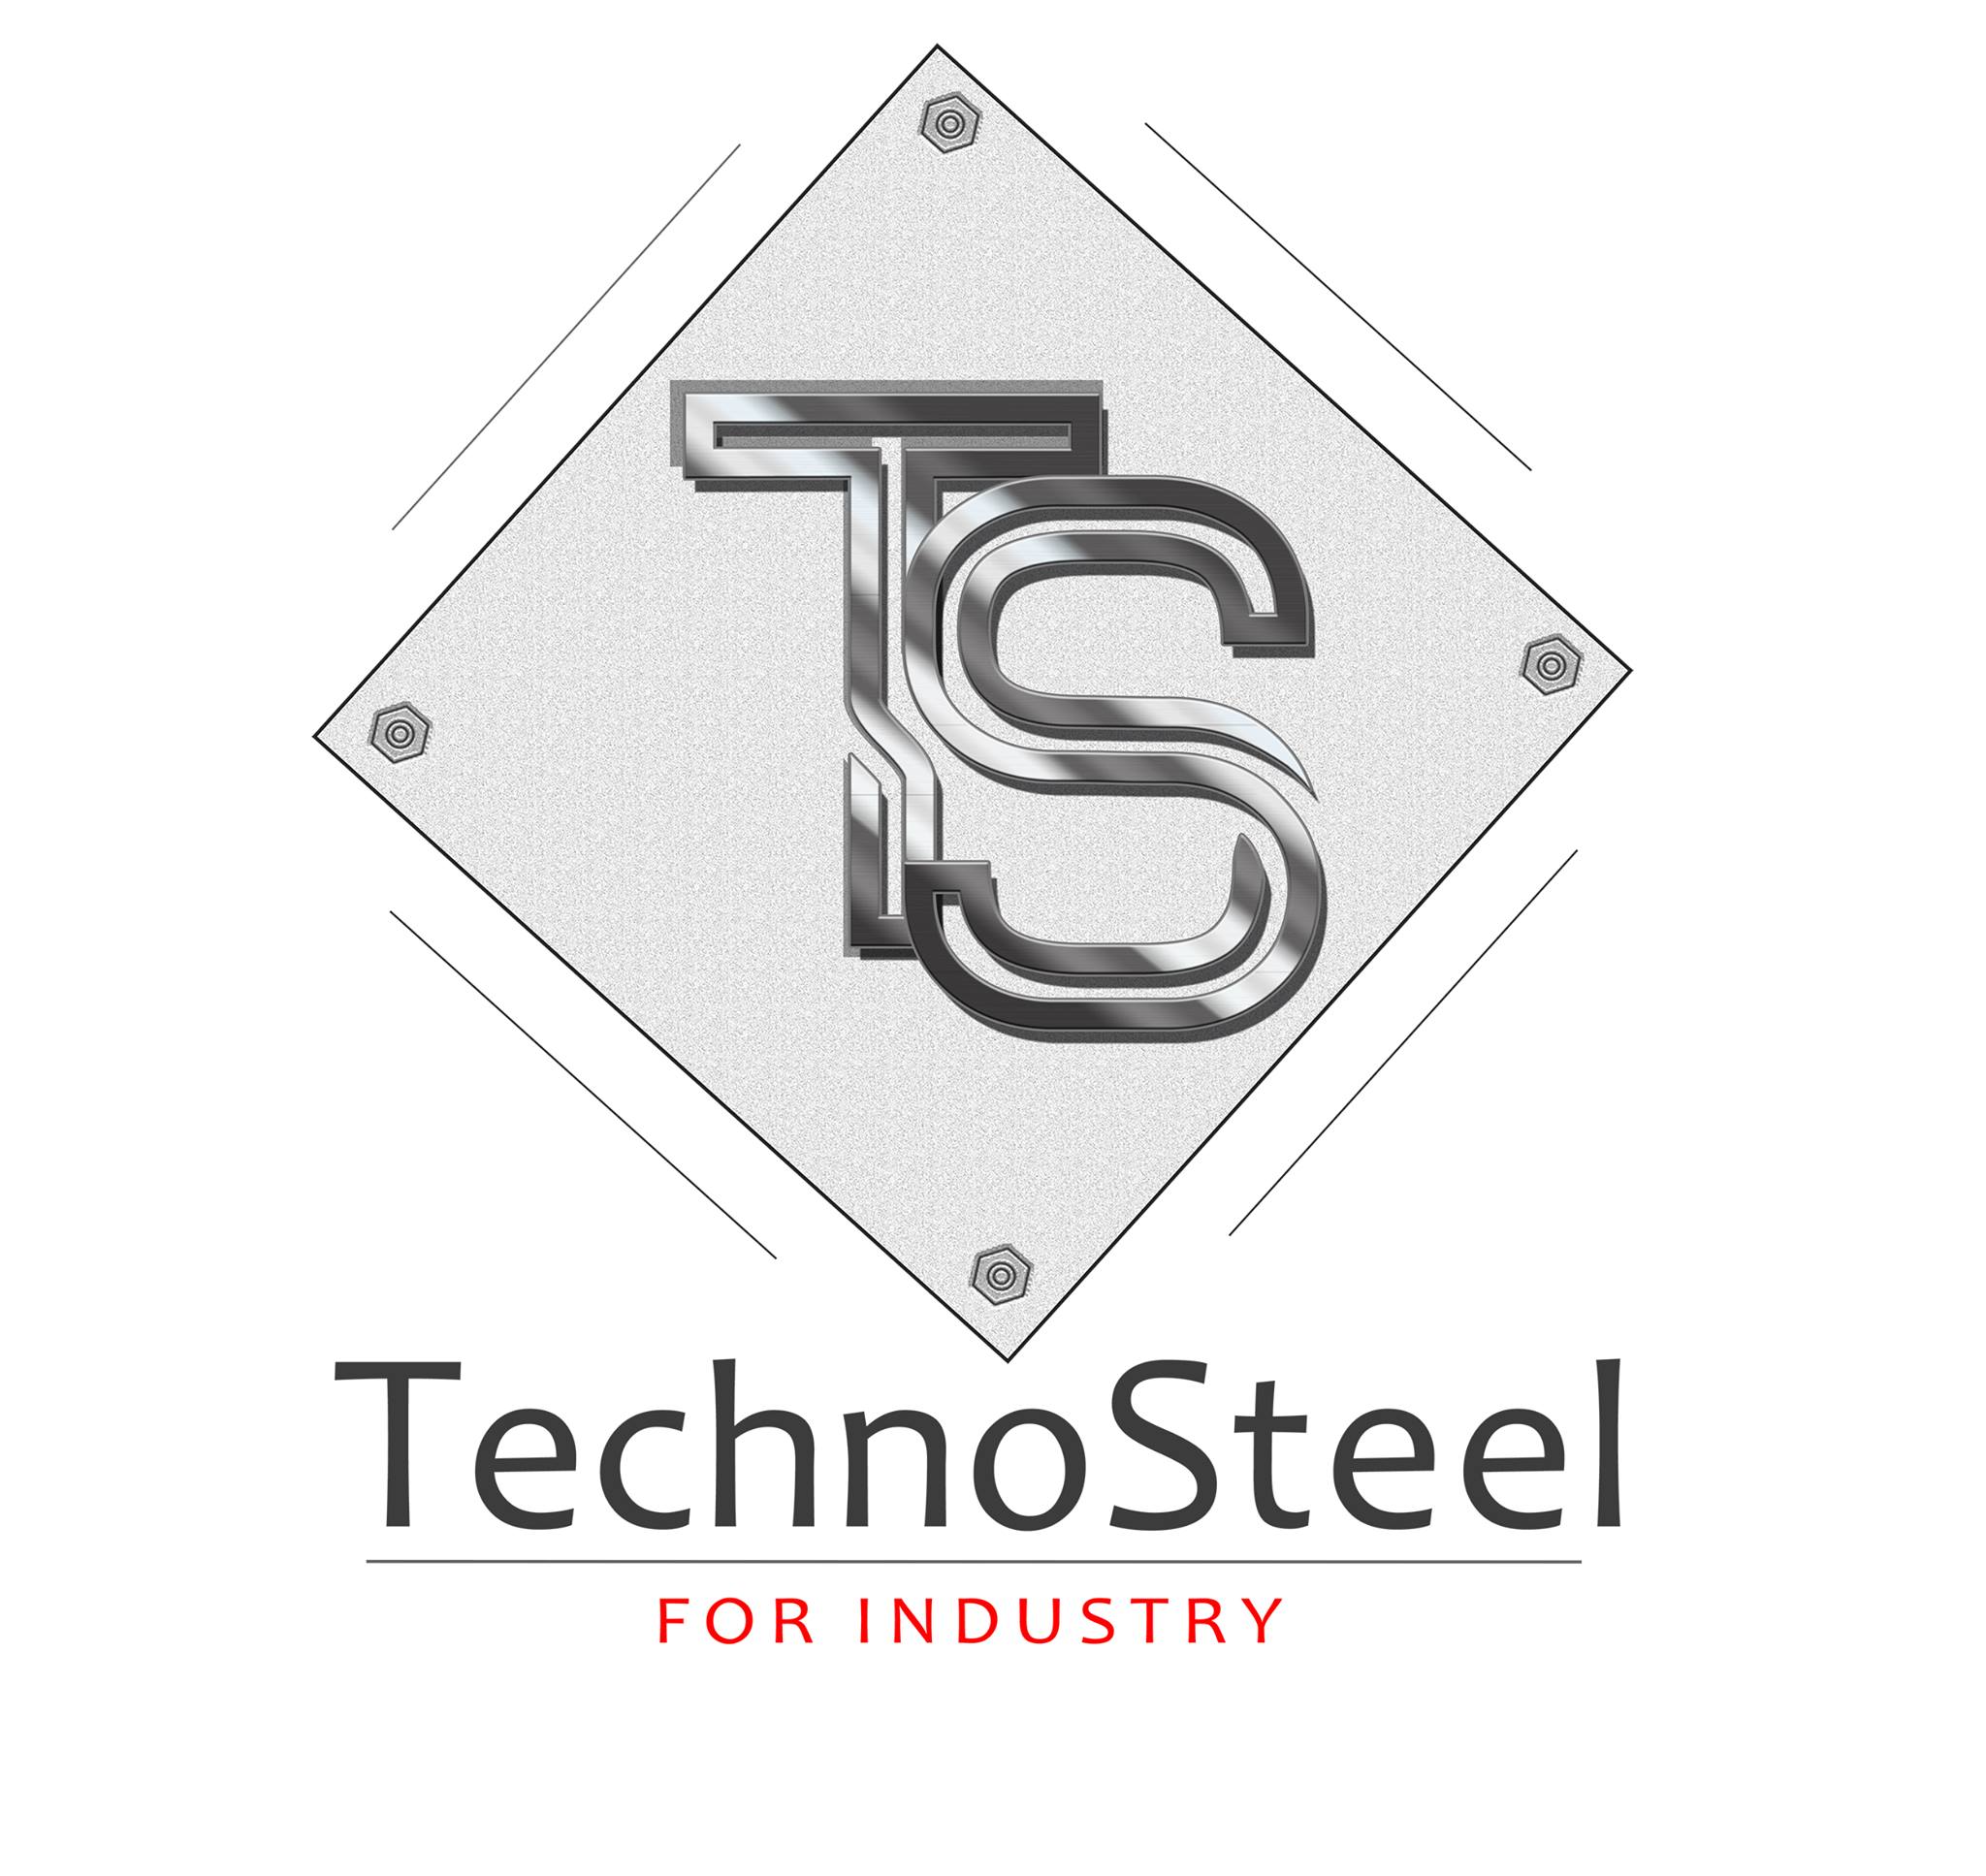 TechnoSteel For Industry